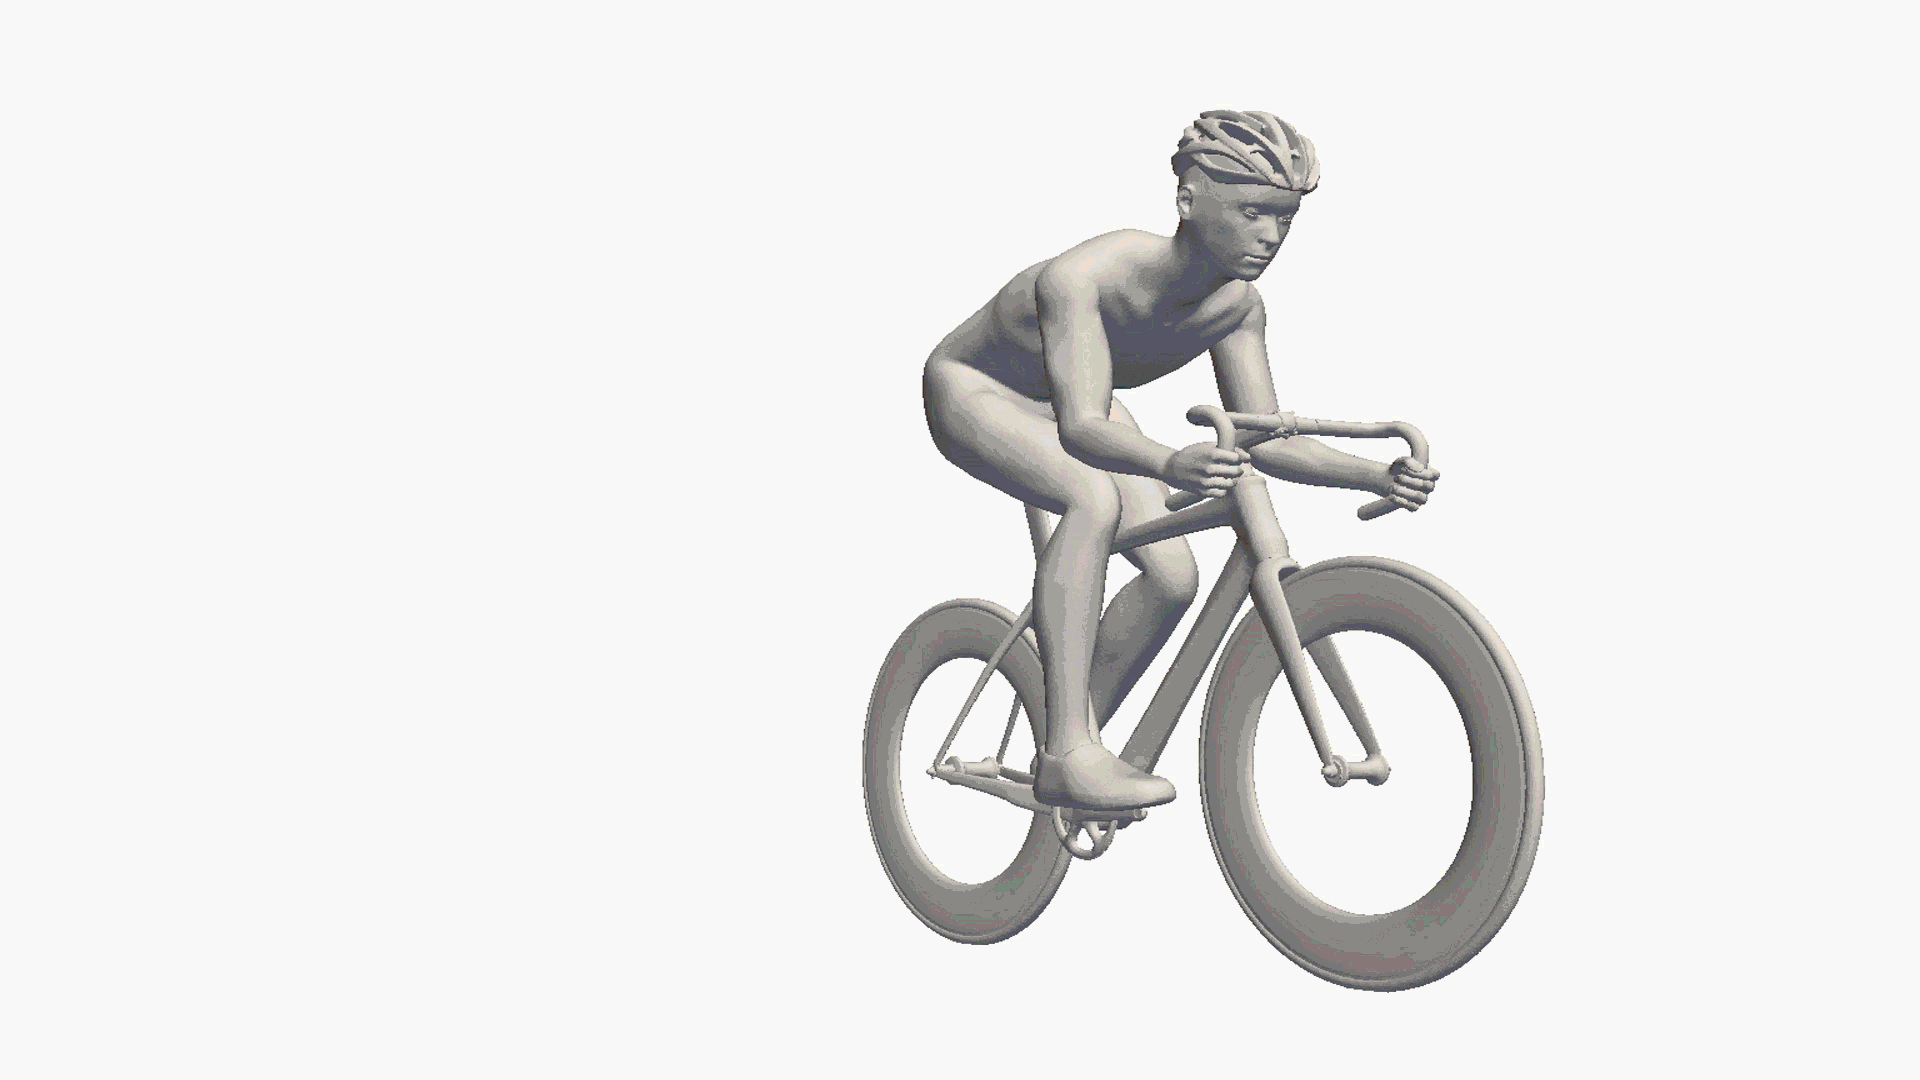 Aerodynamics simulation of a road biker with SimScale.